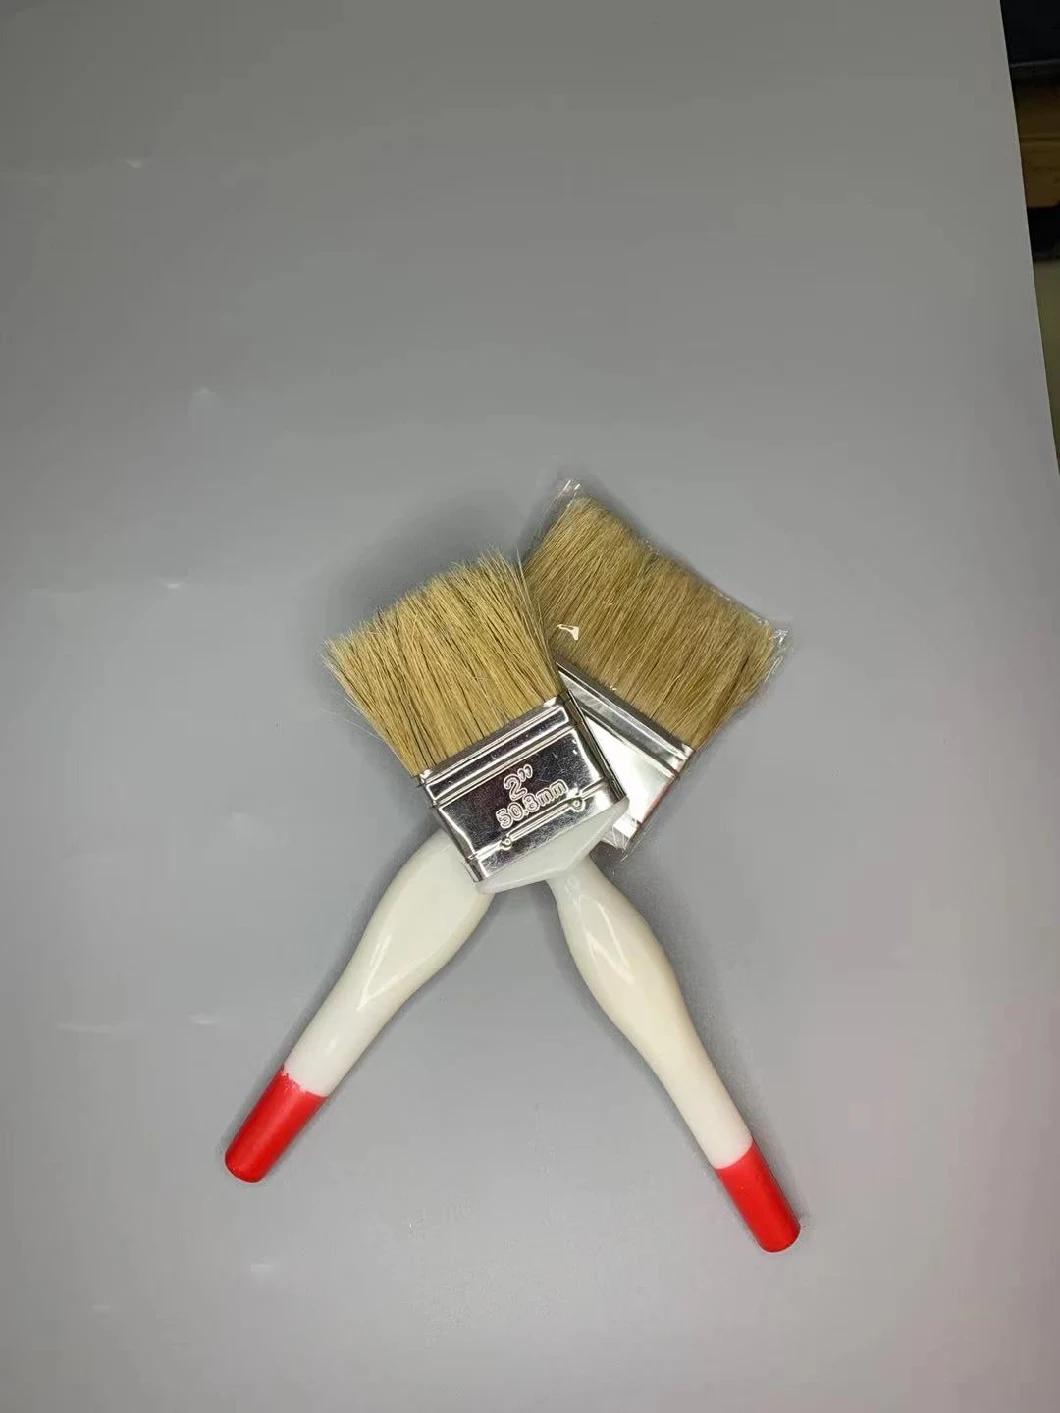 Customized White Wooden Handle Wit Hred Tip 100% Bristle Brush for FRP Laminating